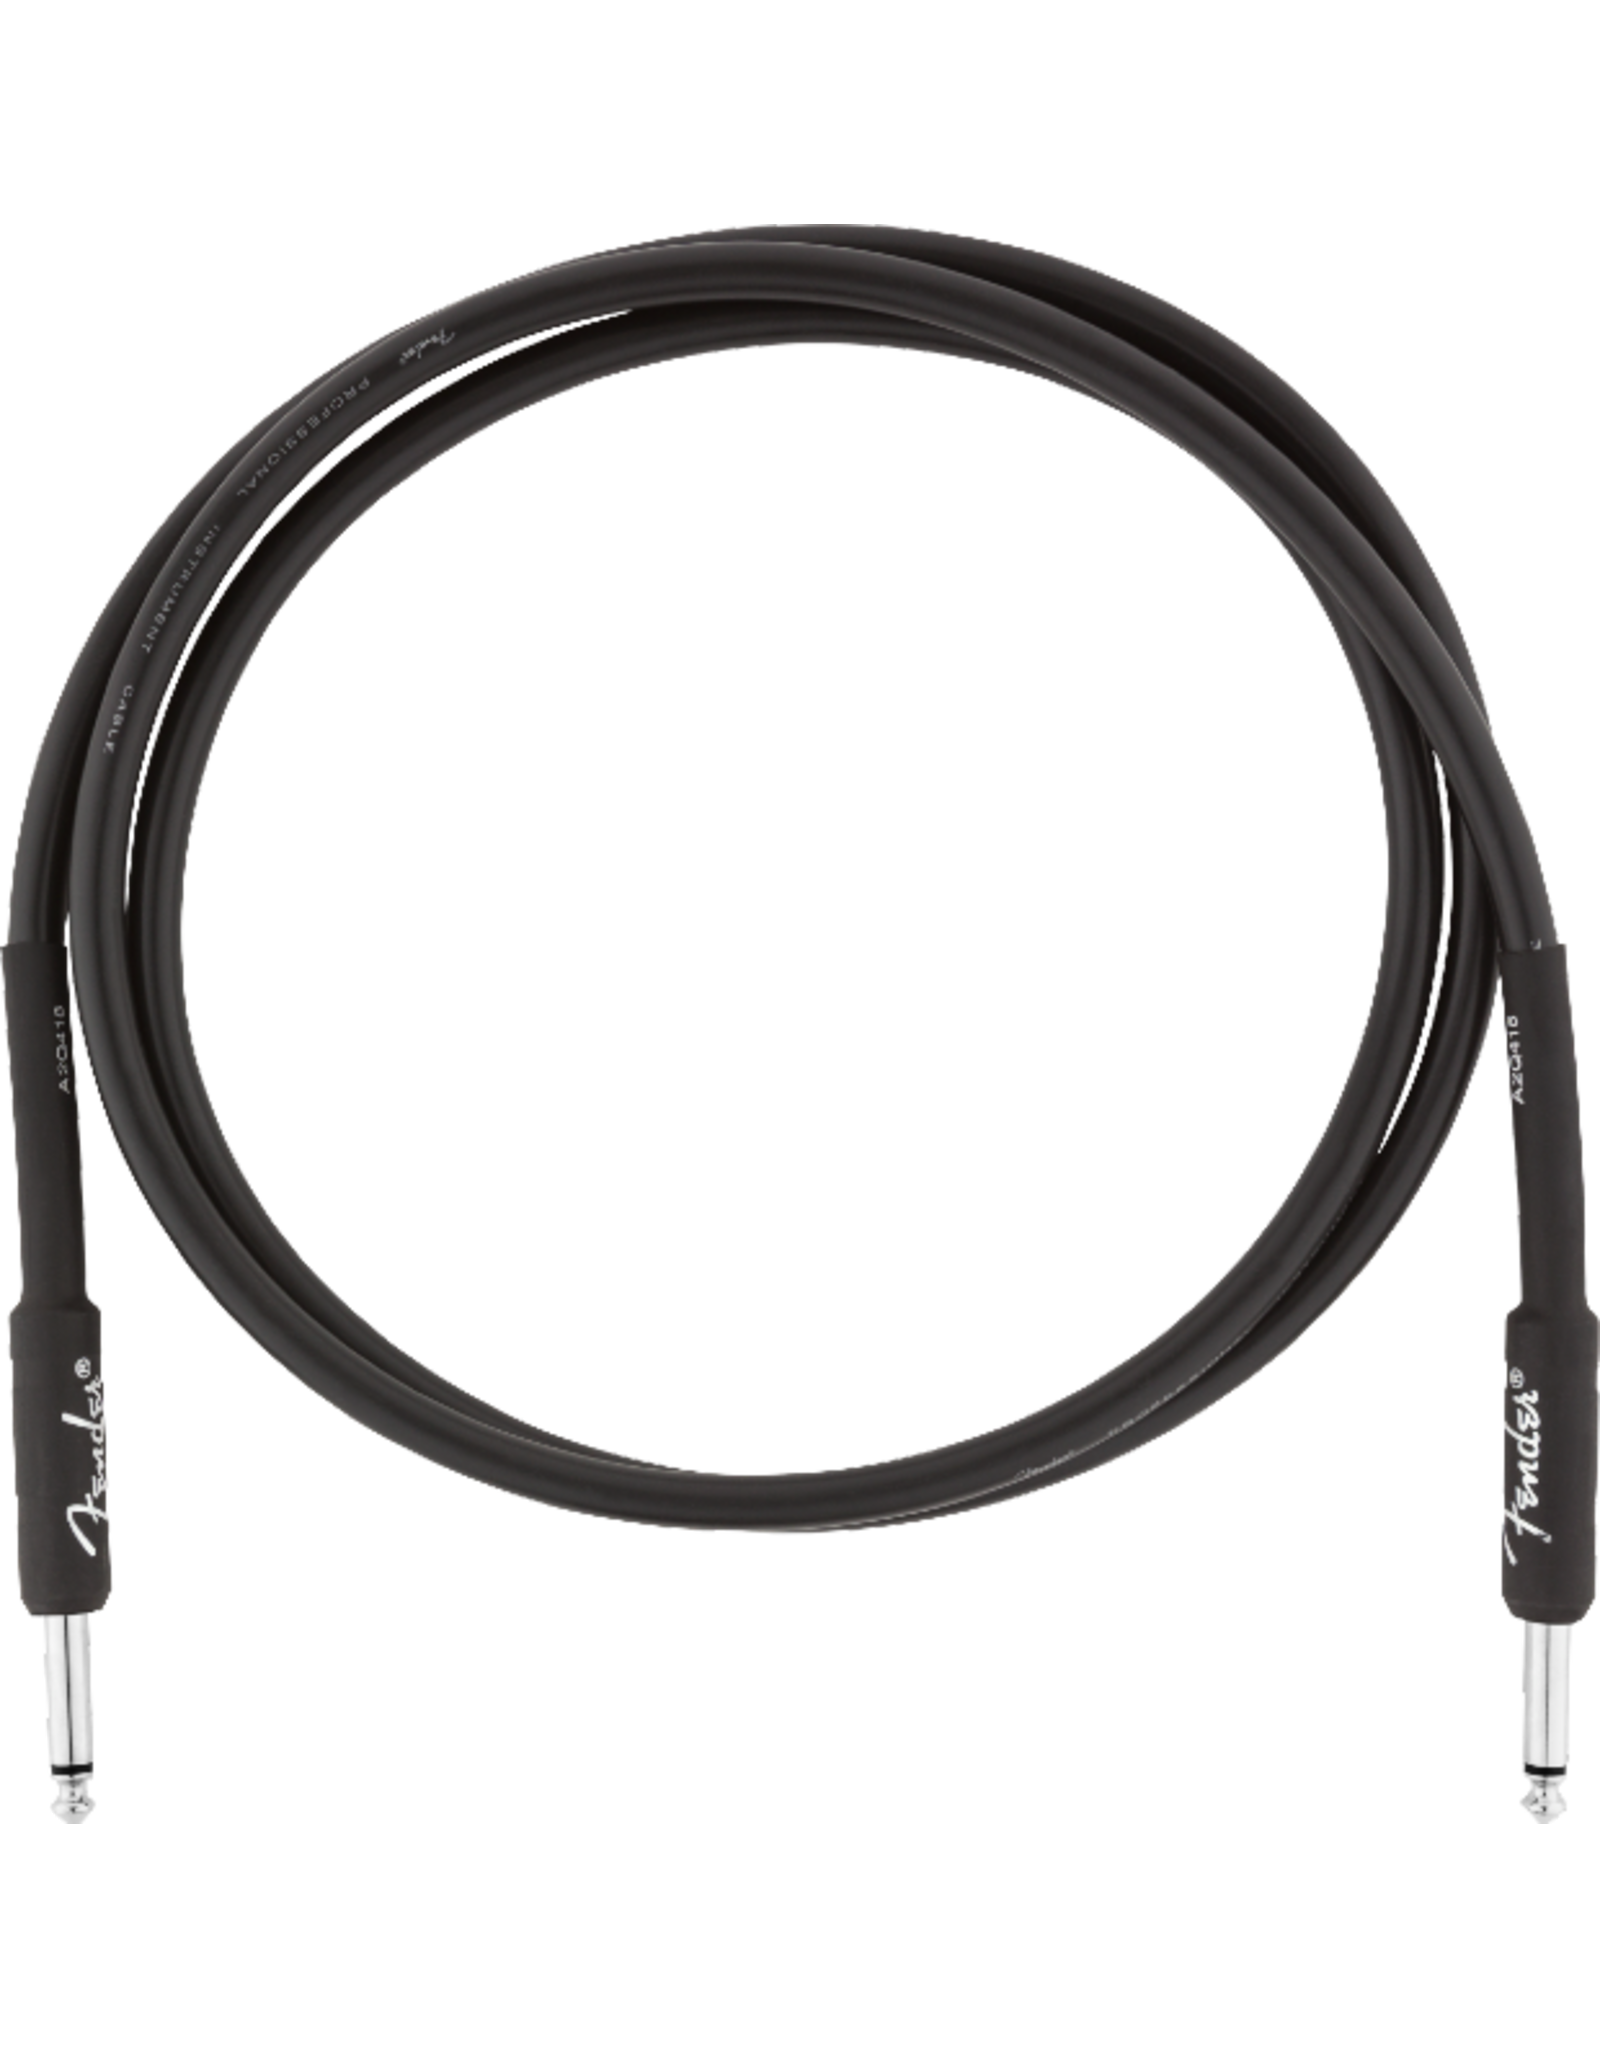 Fender Fender Professional Series Instrument Cable, Straight/Straight, 5', Black